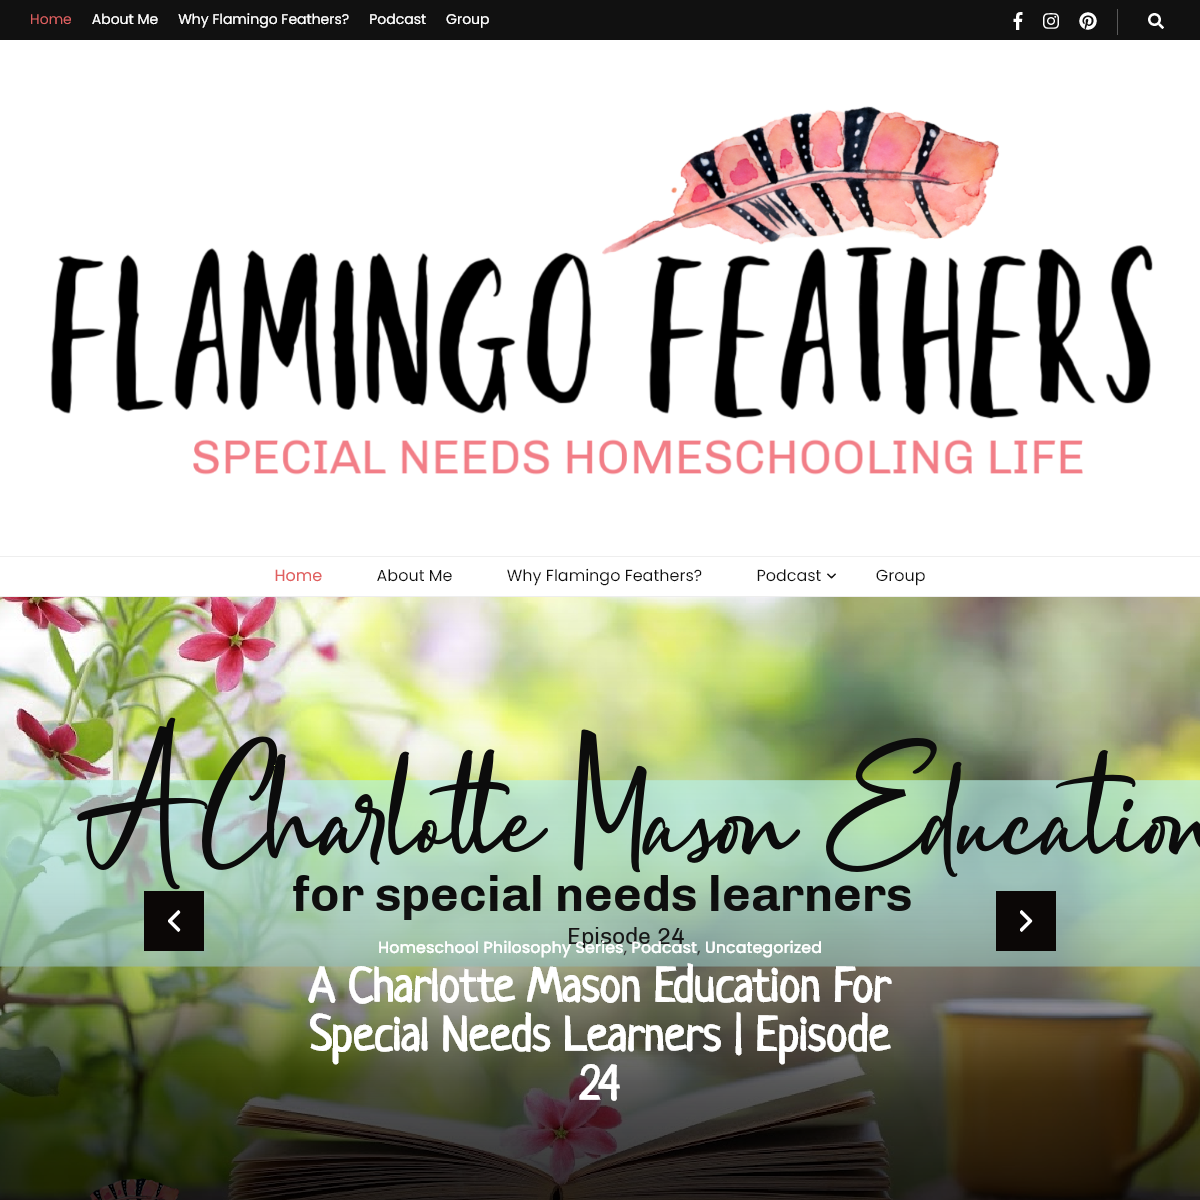 A complete backup of flamingo-feathers.com